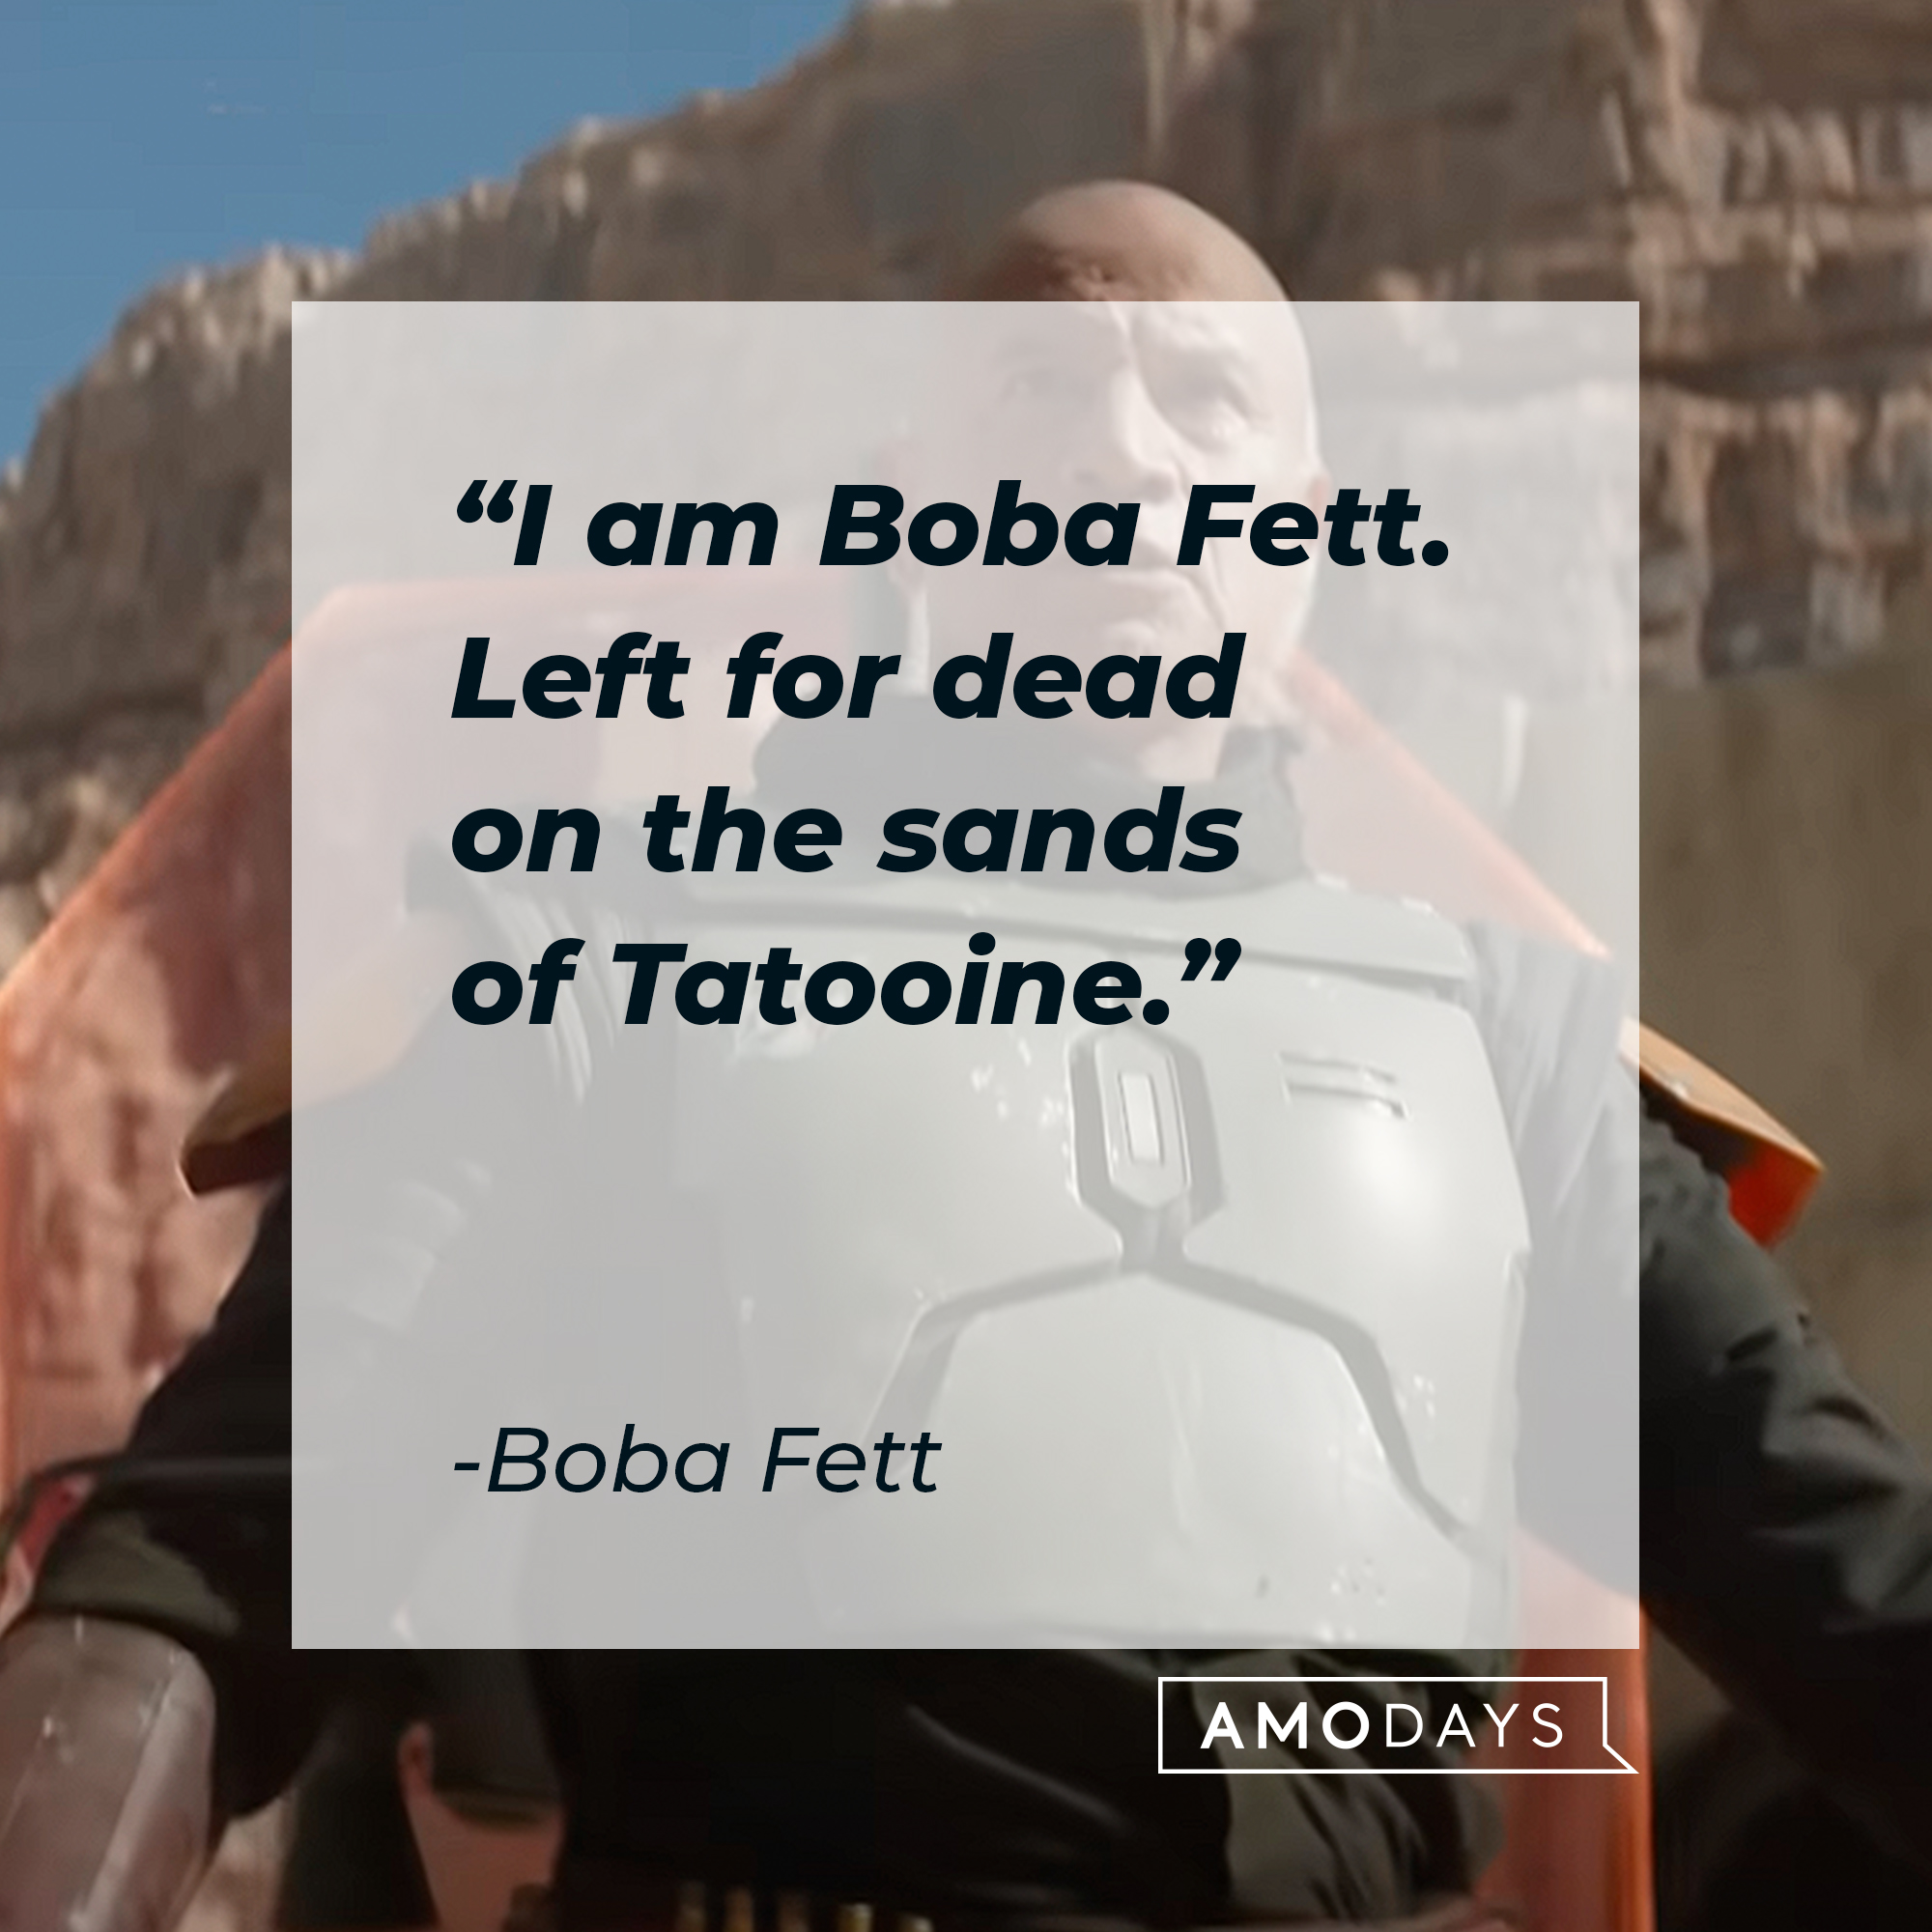 Boba Fett, with his quote: “I am Boba Fett. Left for dead on the sands of Tatooine.”  │ Source: youtube.com/StarWars